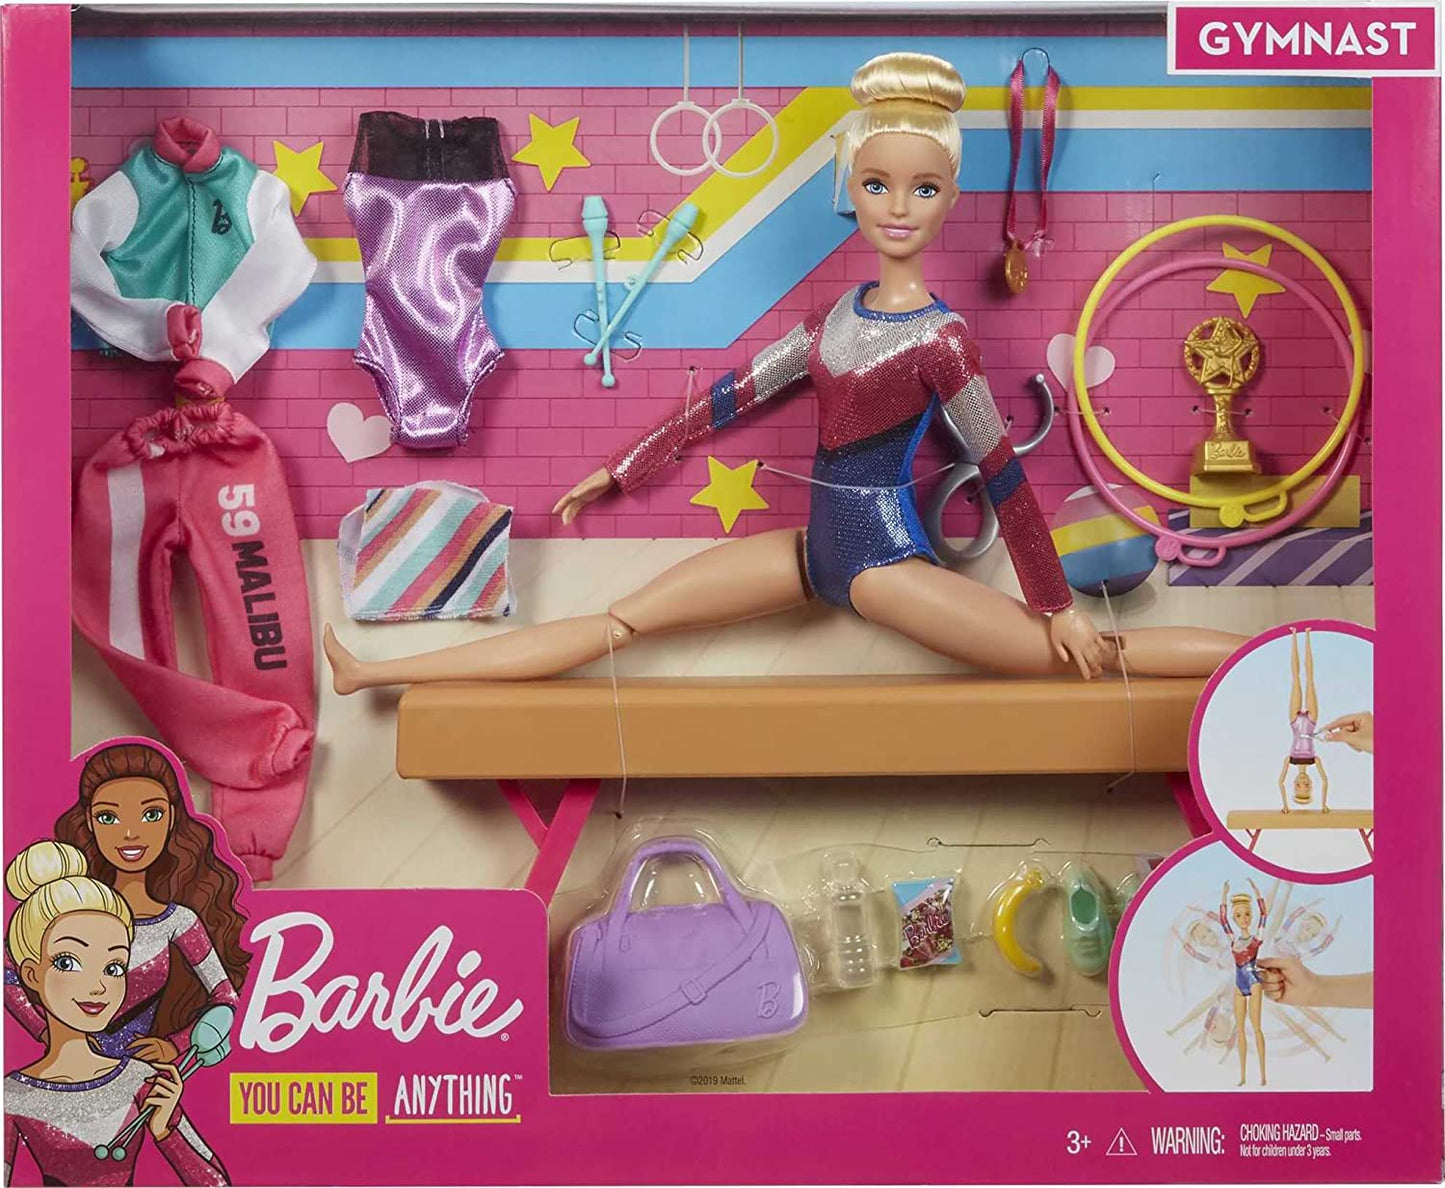 You Can Be Anything Doll, Gymnast Doll Playset with Blonde  Doll, Balance Beam and 15 Gymnastic Doll Accessories, Toys for Ages 3 and Up, One  Doll, GJM72